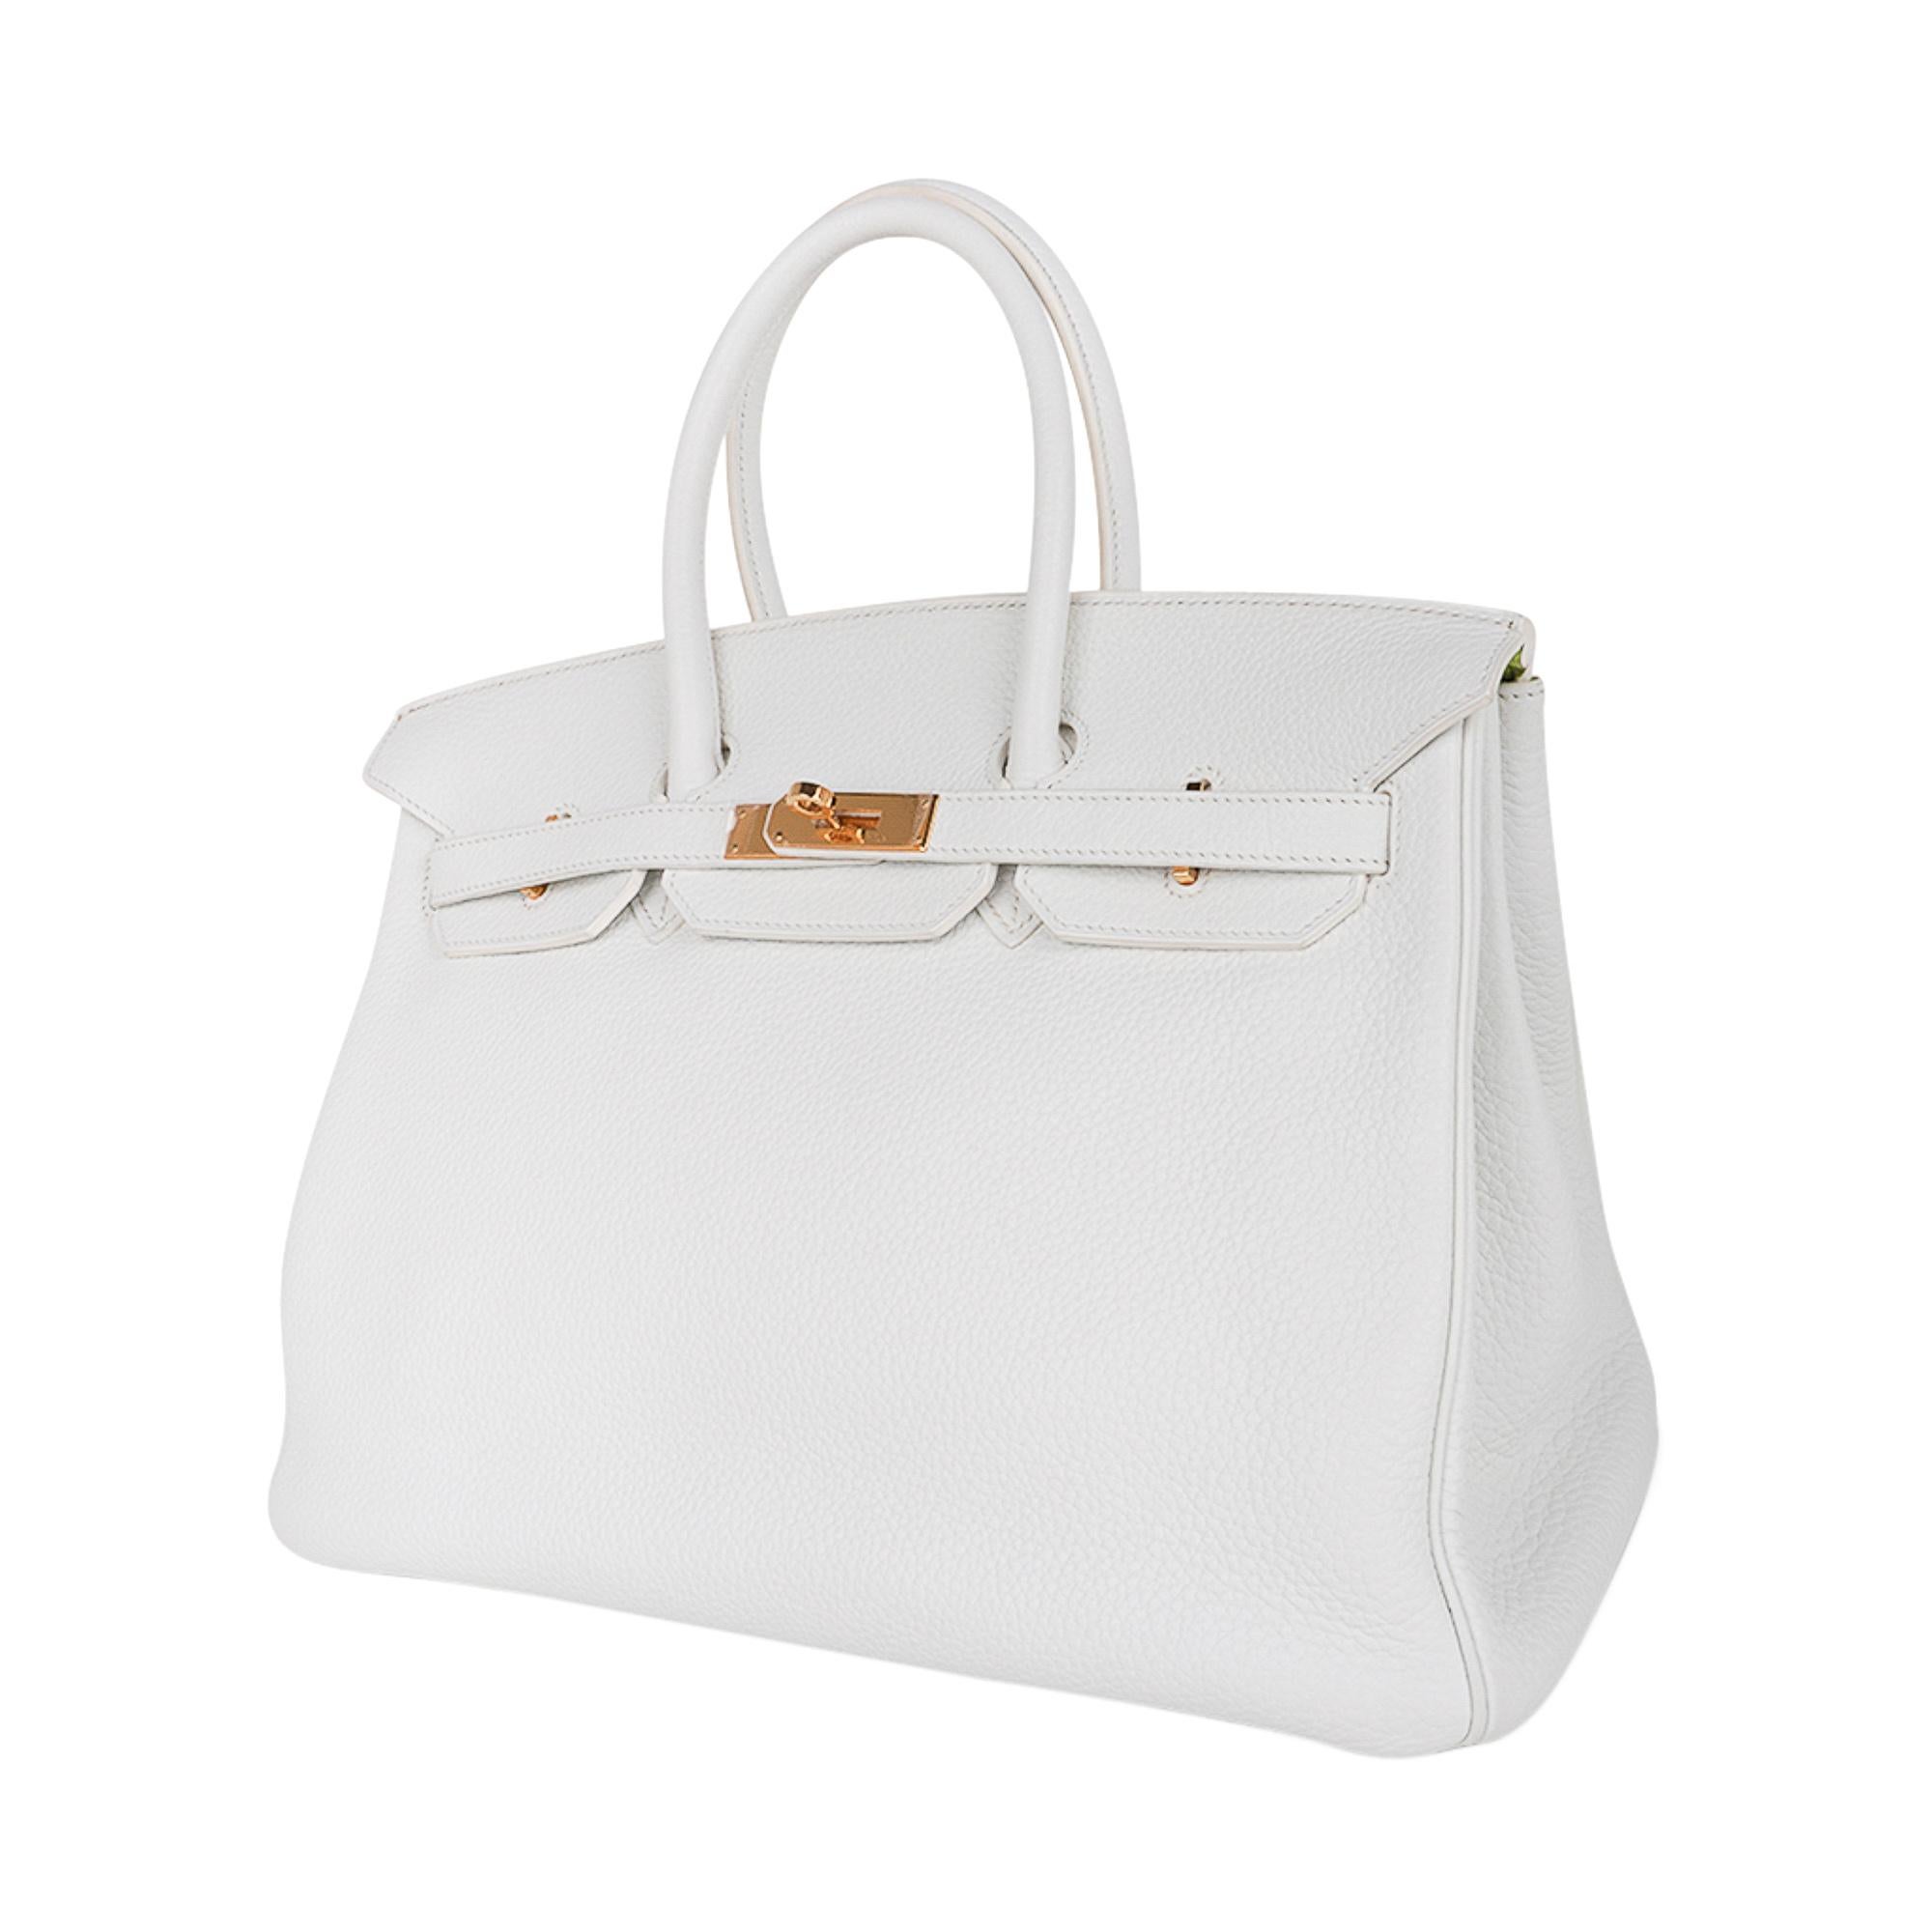 Mightychic offers a guaranteed authentic Hermes Birkin HSS 35 bag featured in crisp White Clemence Leather.
Fresh Kiwi interior.
Rich with gold hardware.
White is the most rare leather colour produced by Hermes.
Neutral and gorgeous for year round